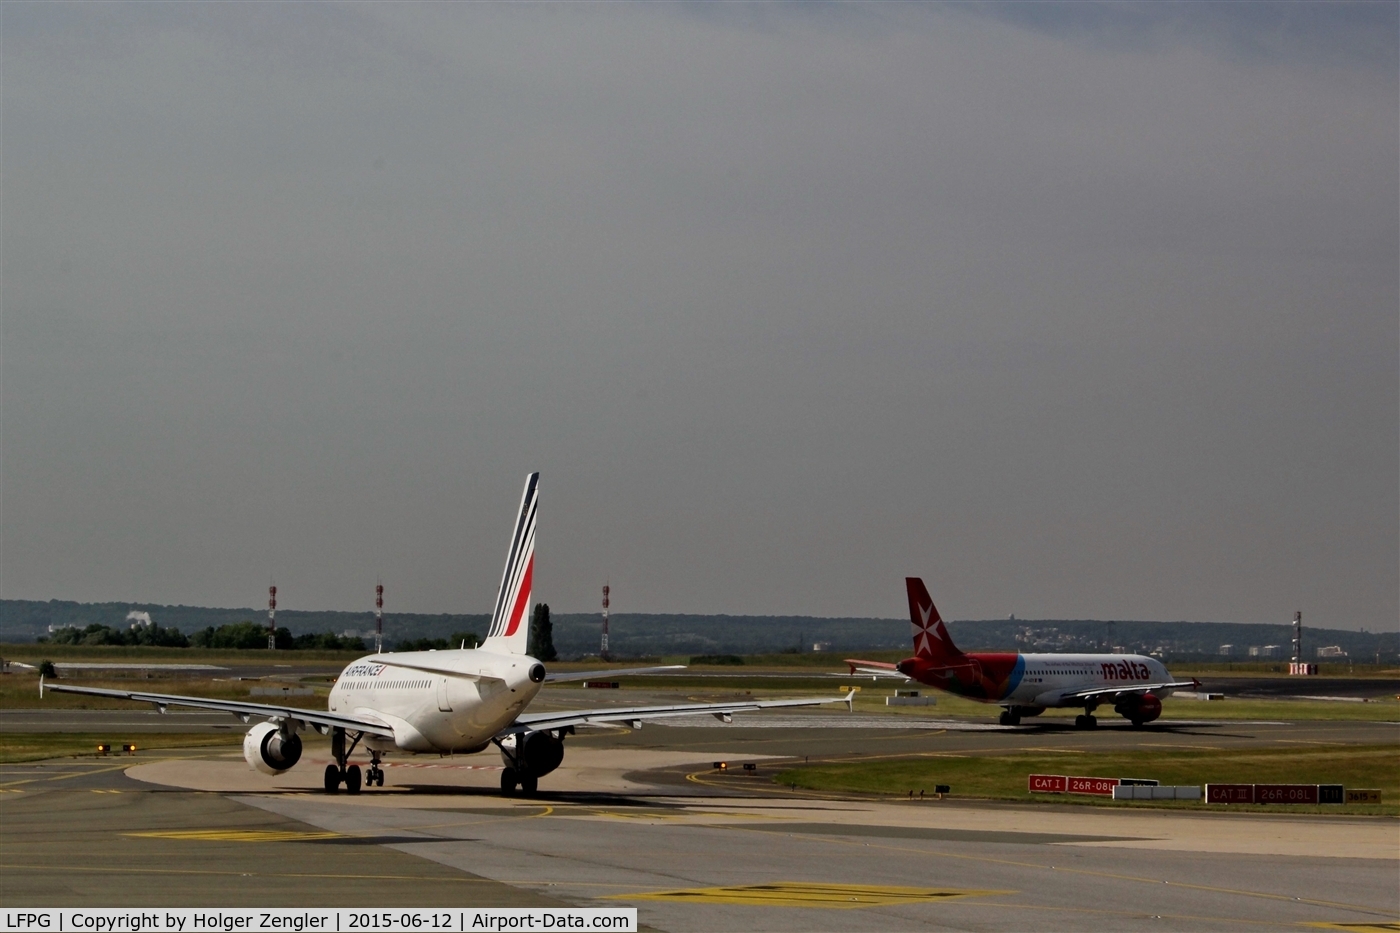 Paris Charles de Gaulle Airport (Roissy Airport), Paris France (LFPG) - We are number three for departure on rwy 26R...